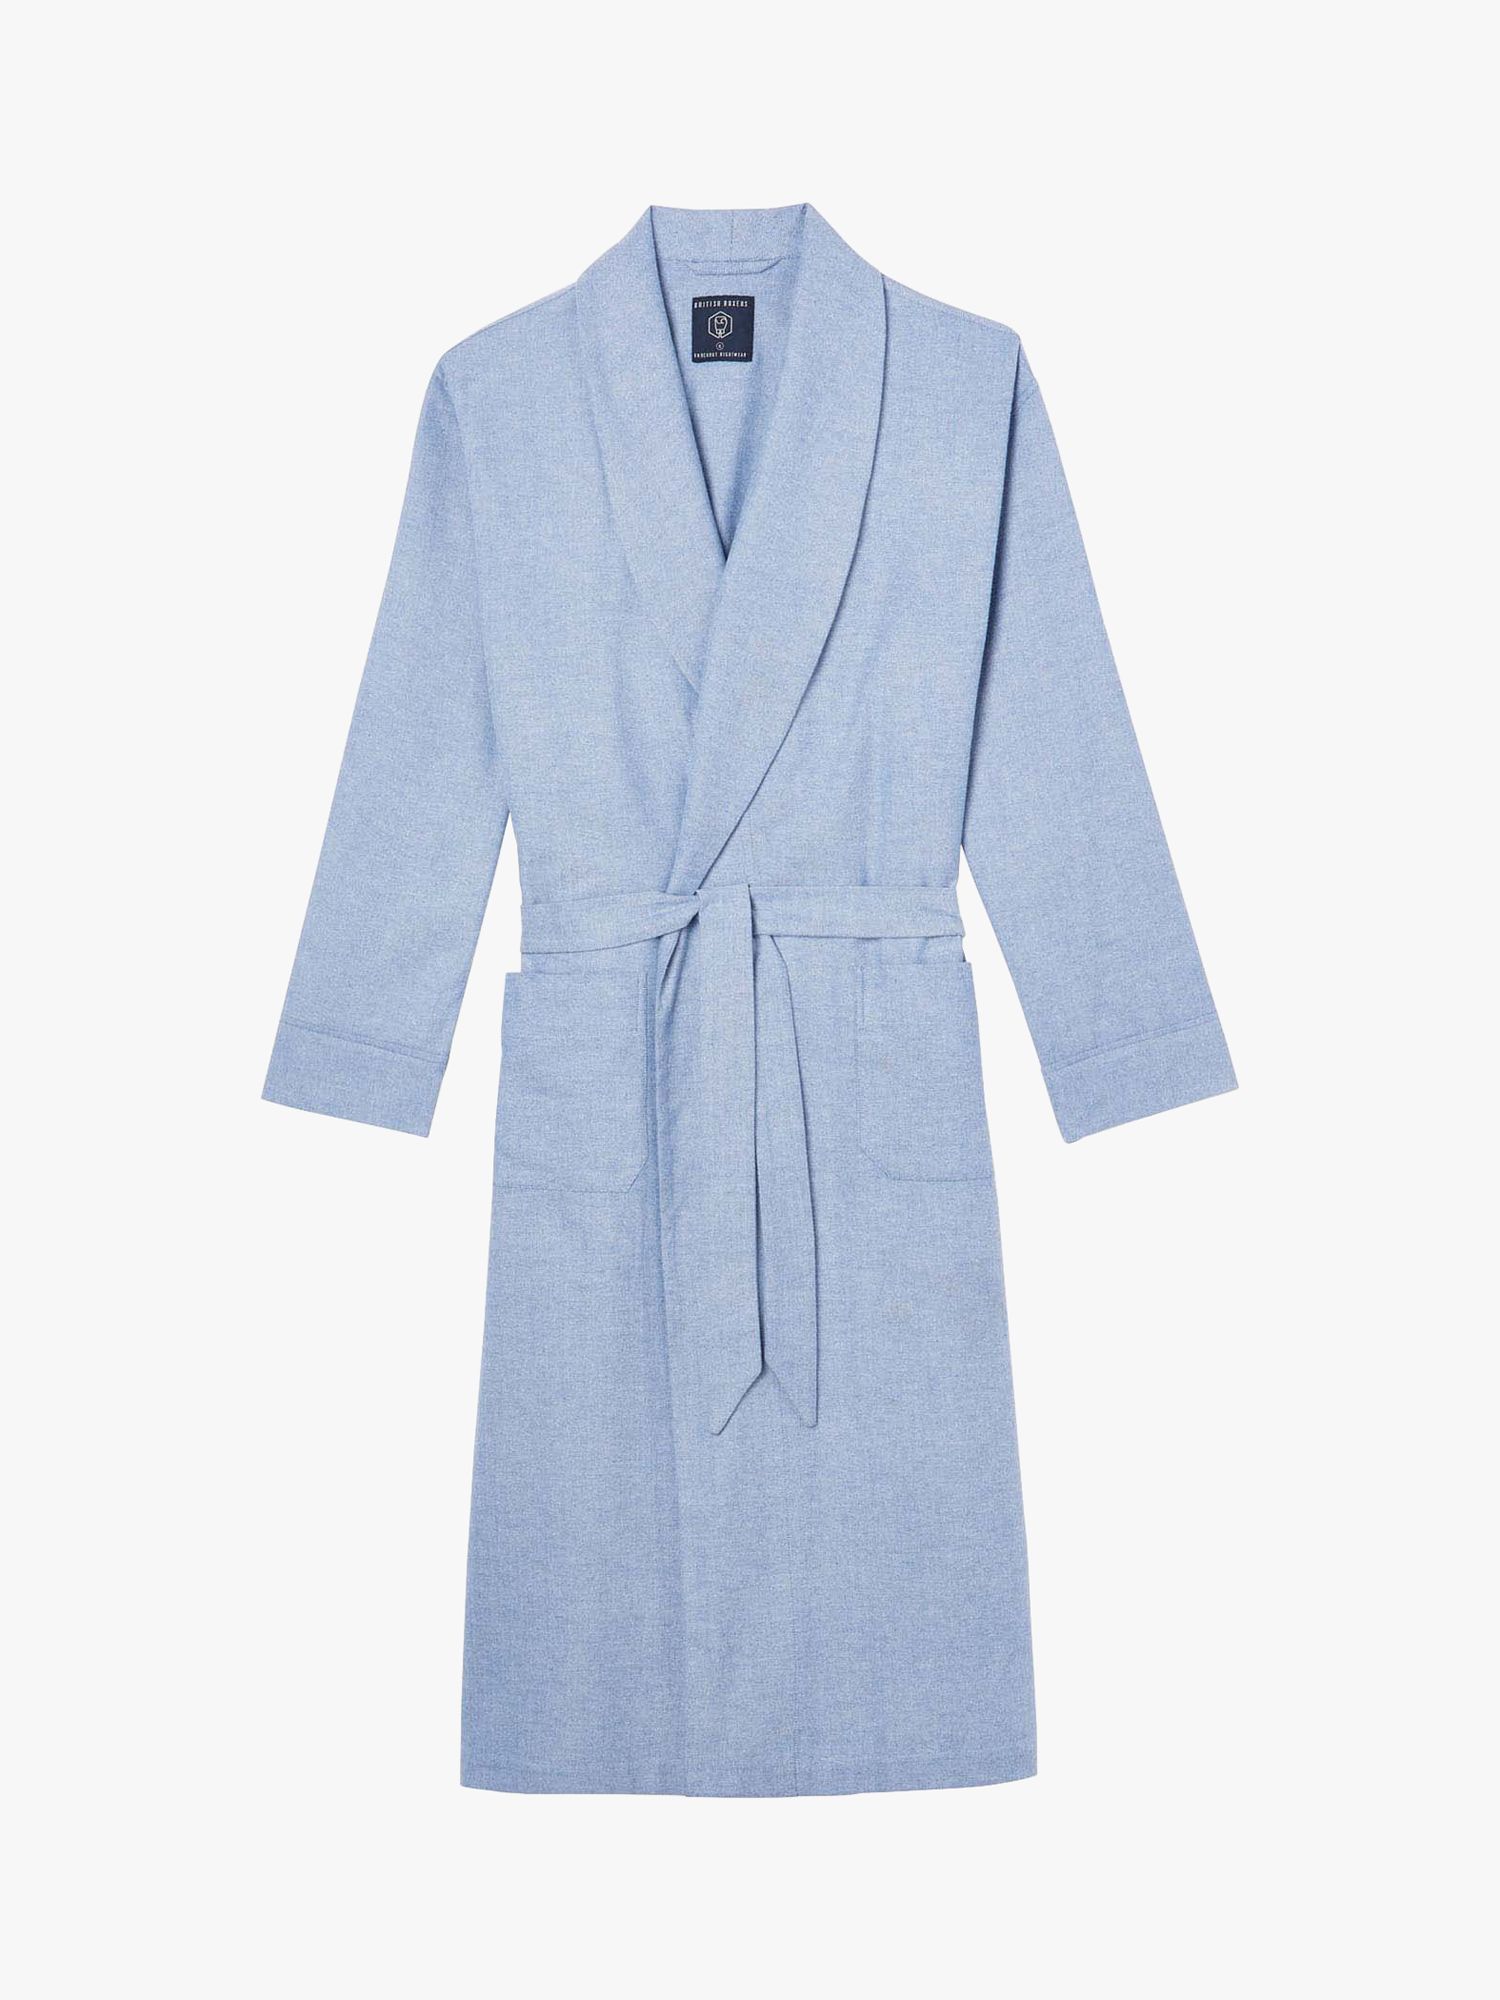 British Boxers Herringbone Brushed Cotton Dressing Gown, Staffordshire Blue, S